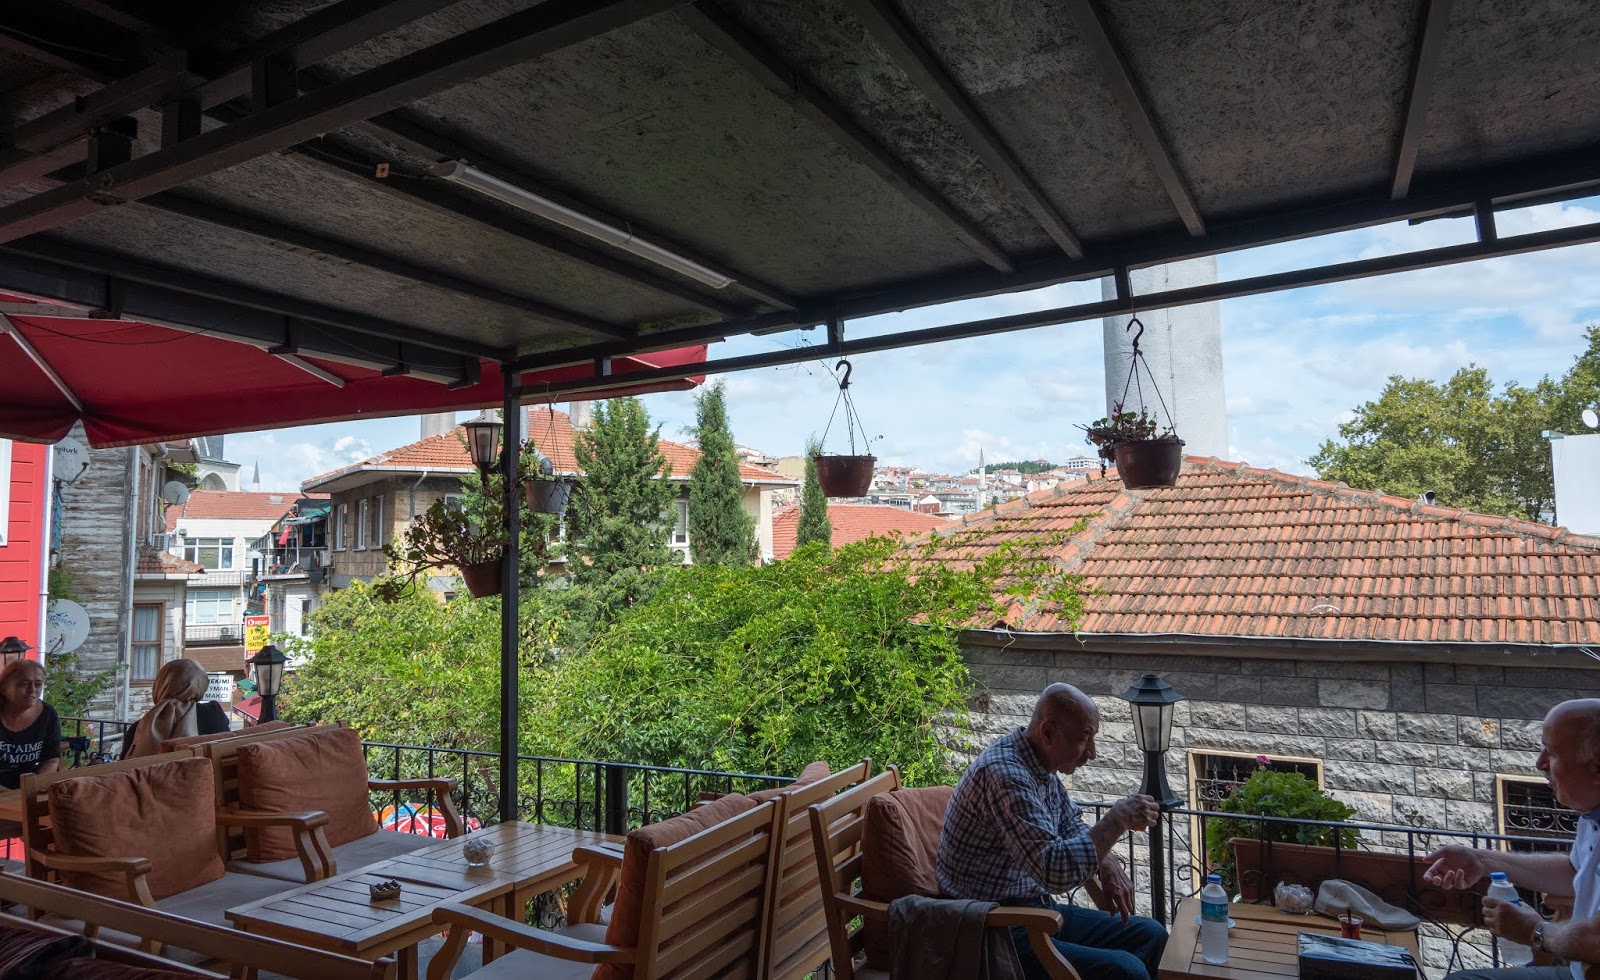 Eating lunch on the Asian side of Istanbul, Turkey